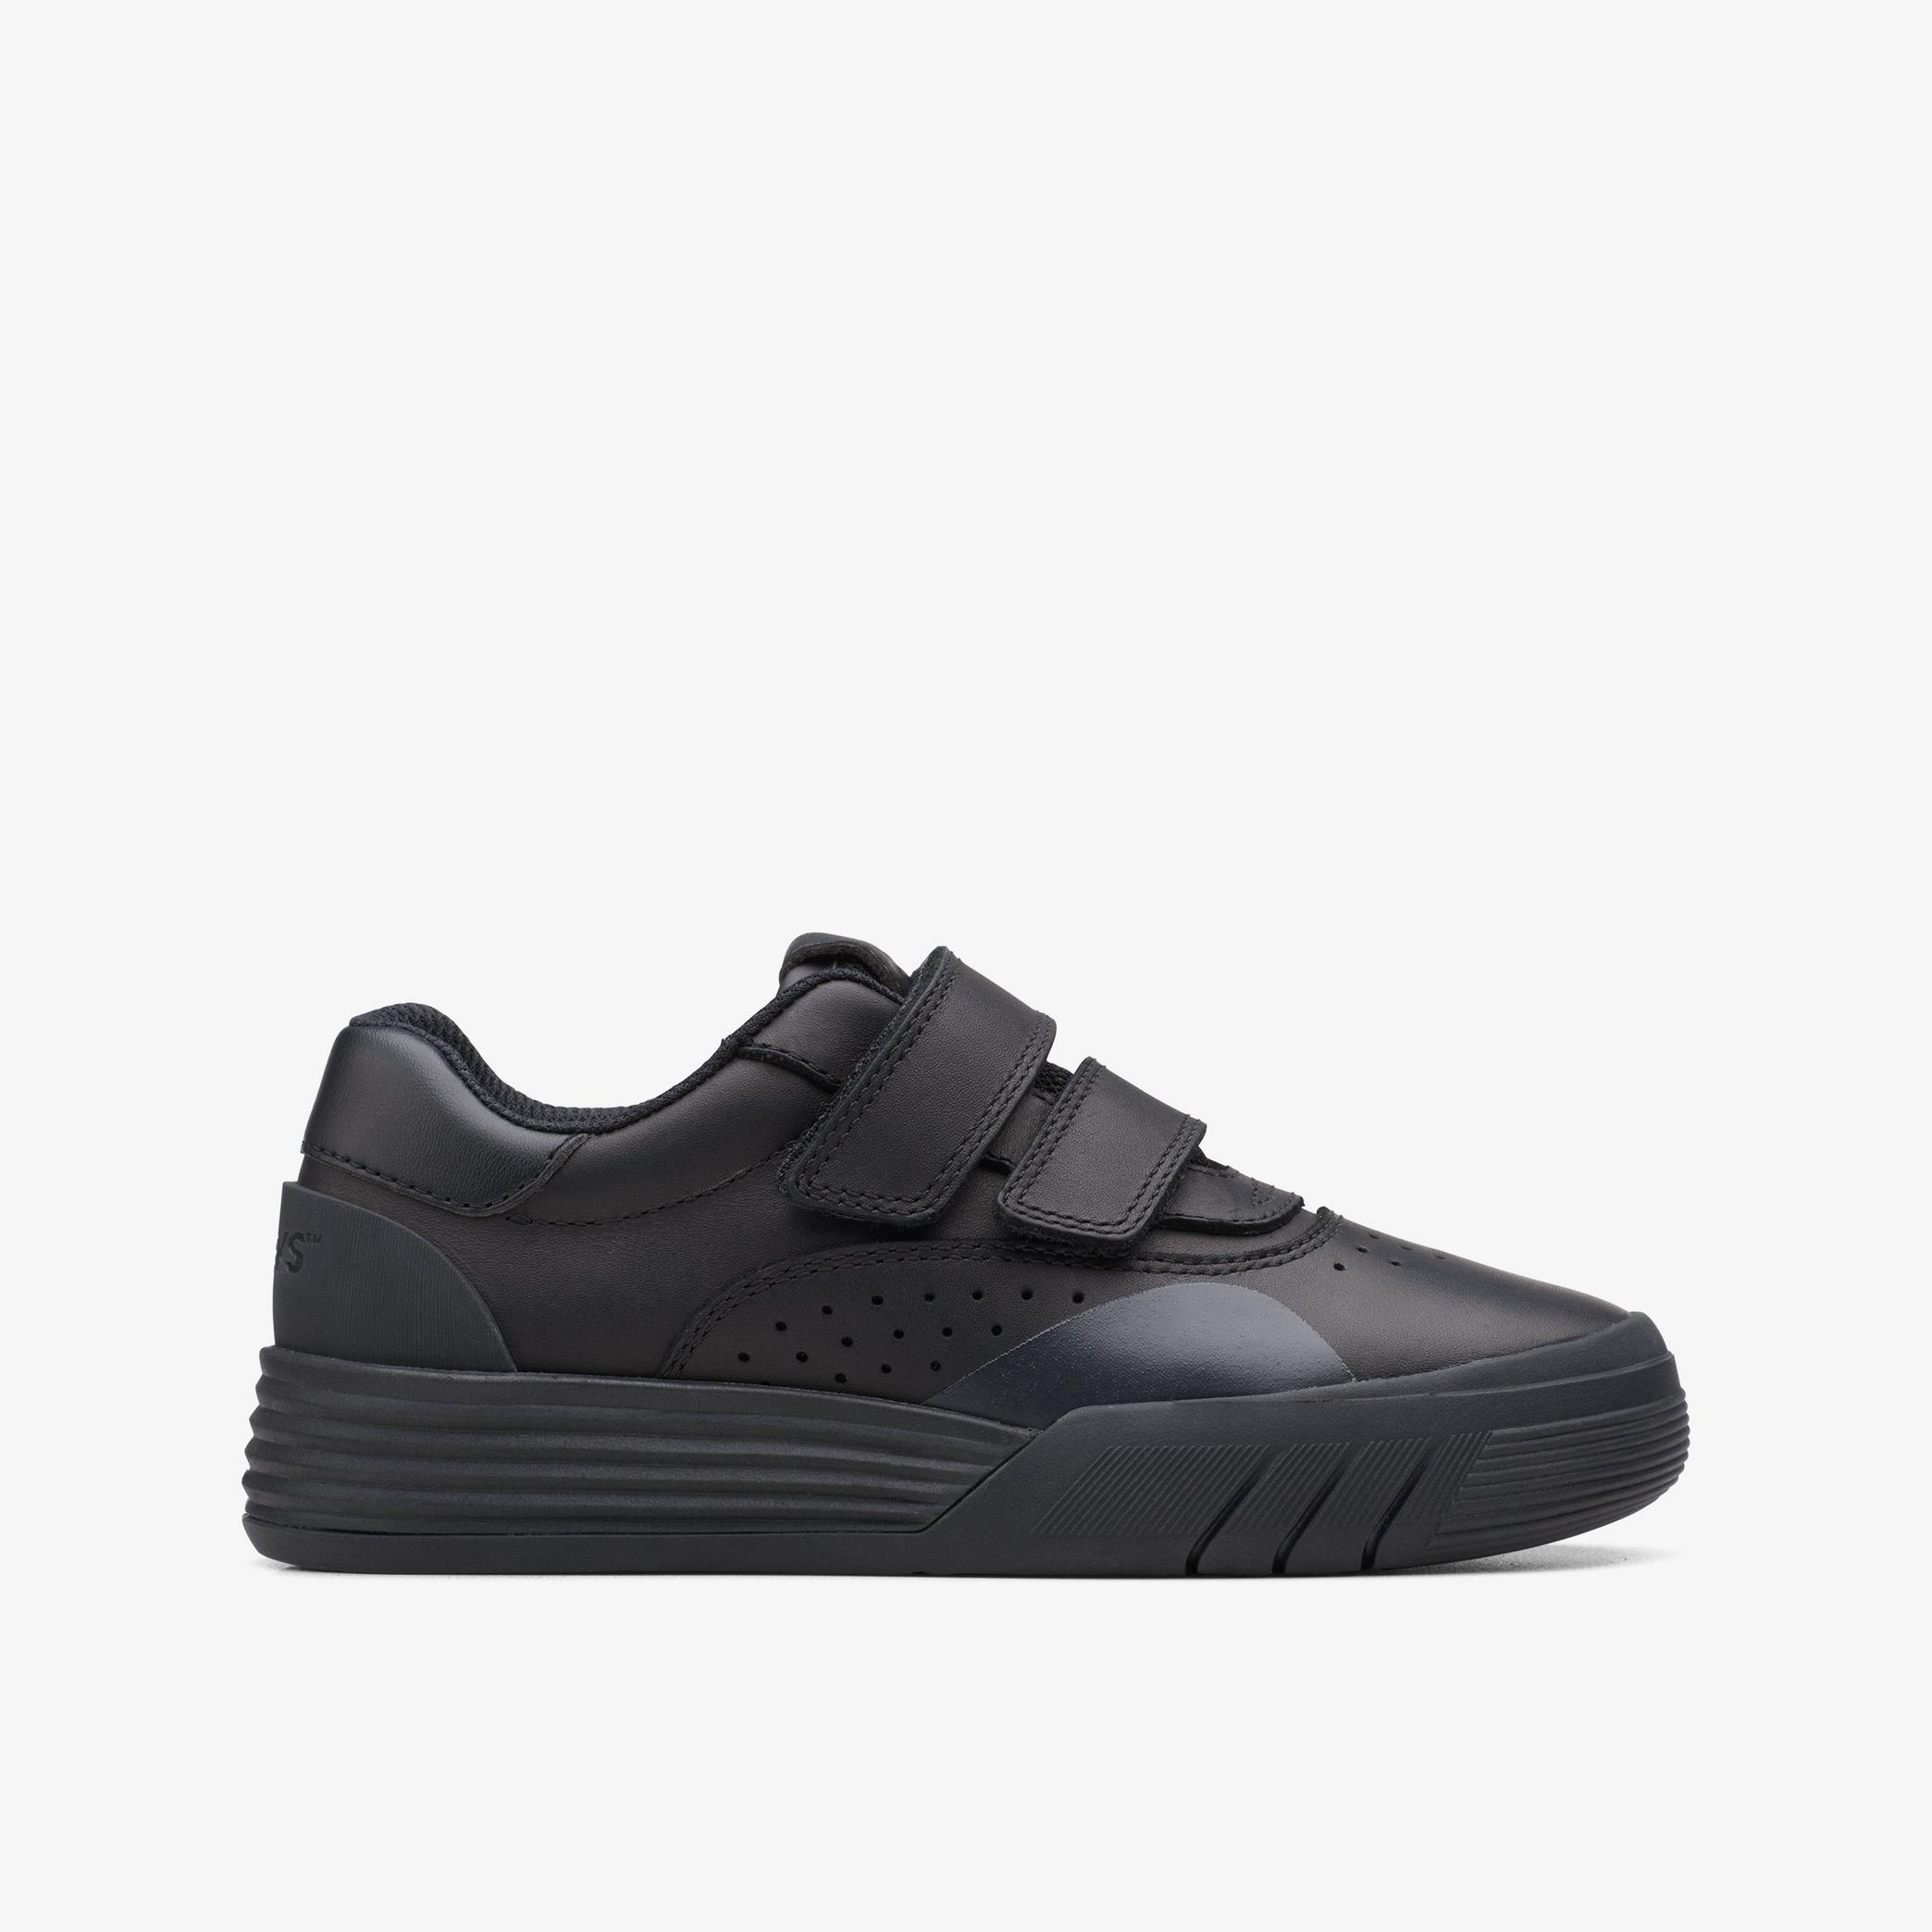 CICA Go Kid Black Leather Trainers, view 1 of 6